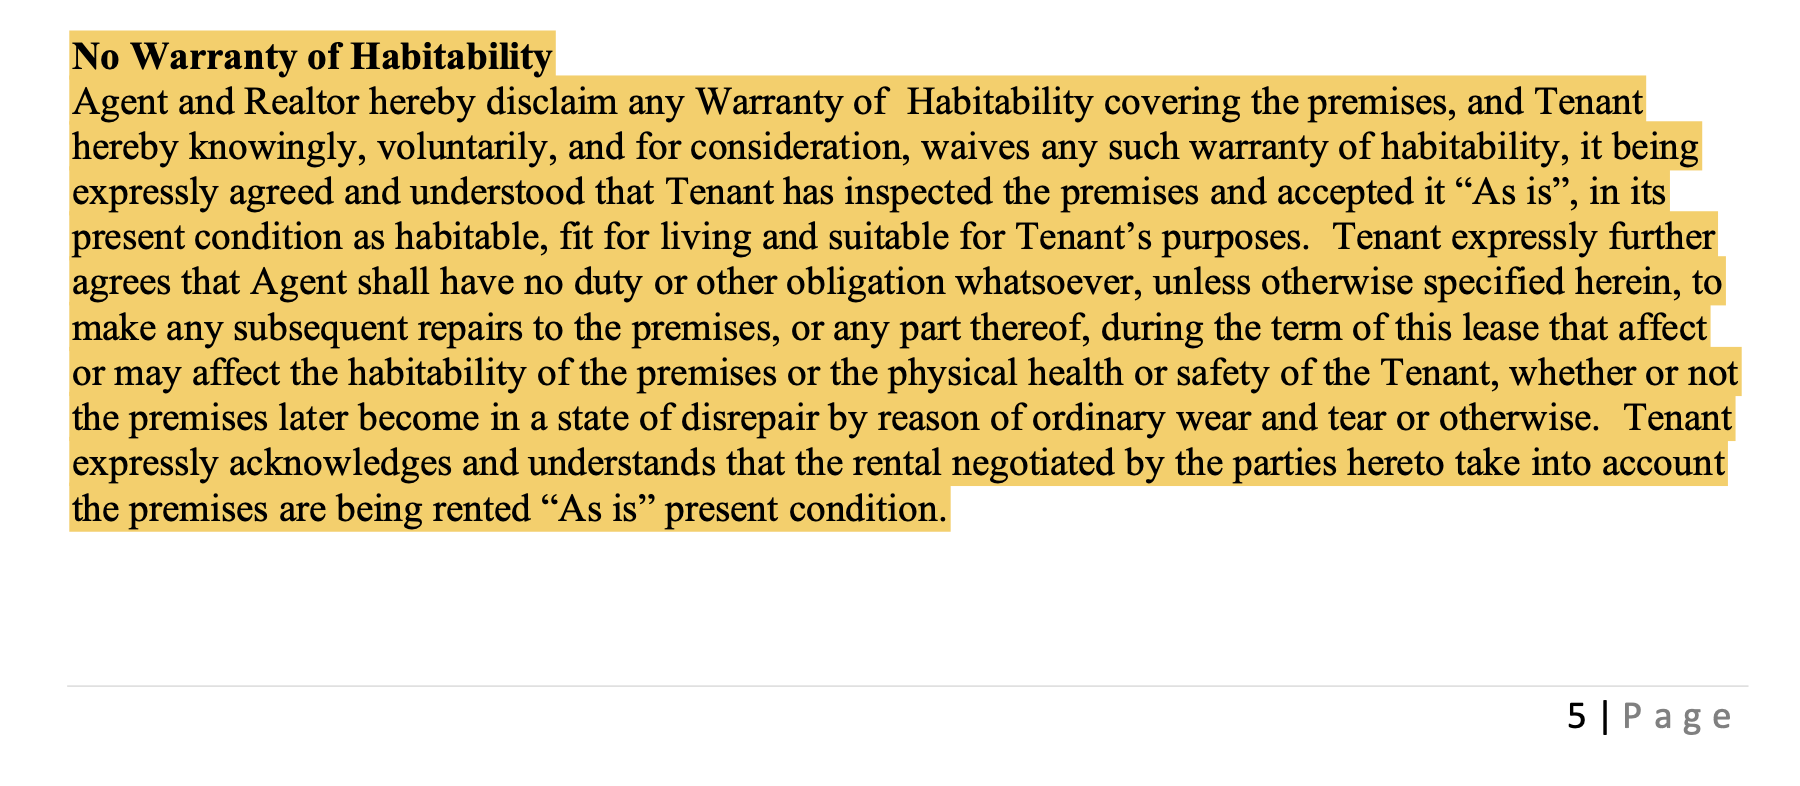 Page 5, trying to disclaim State required minimums